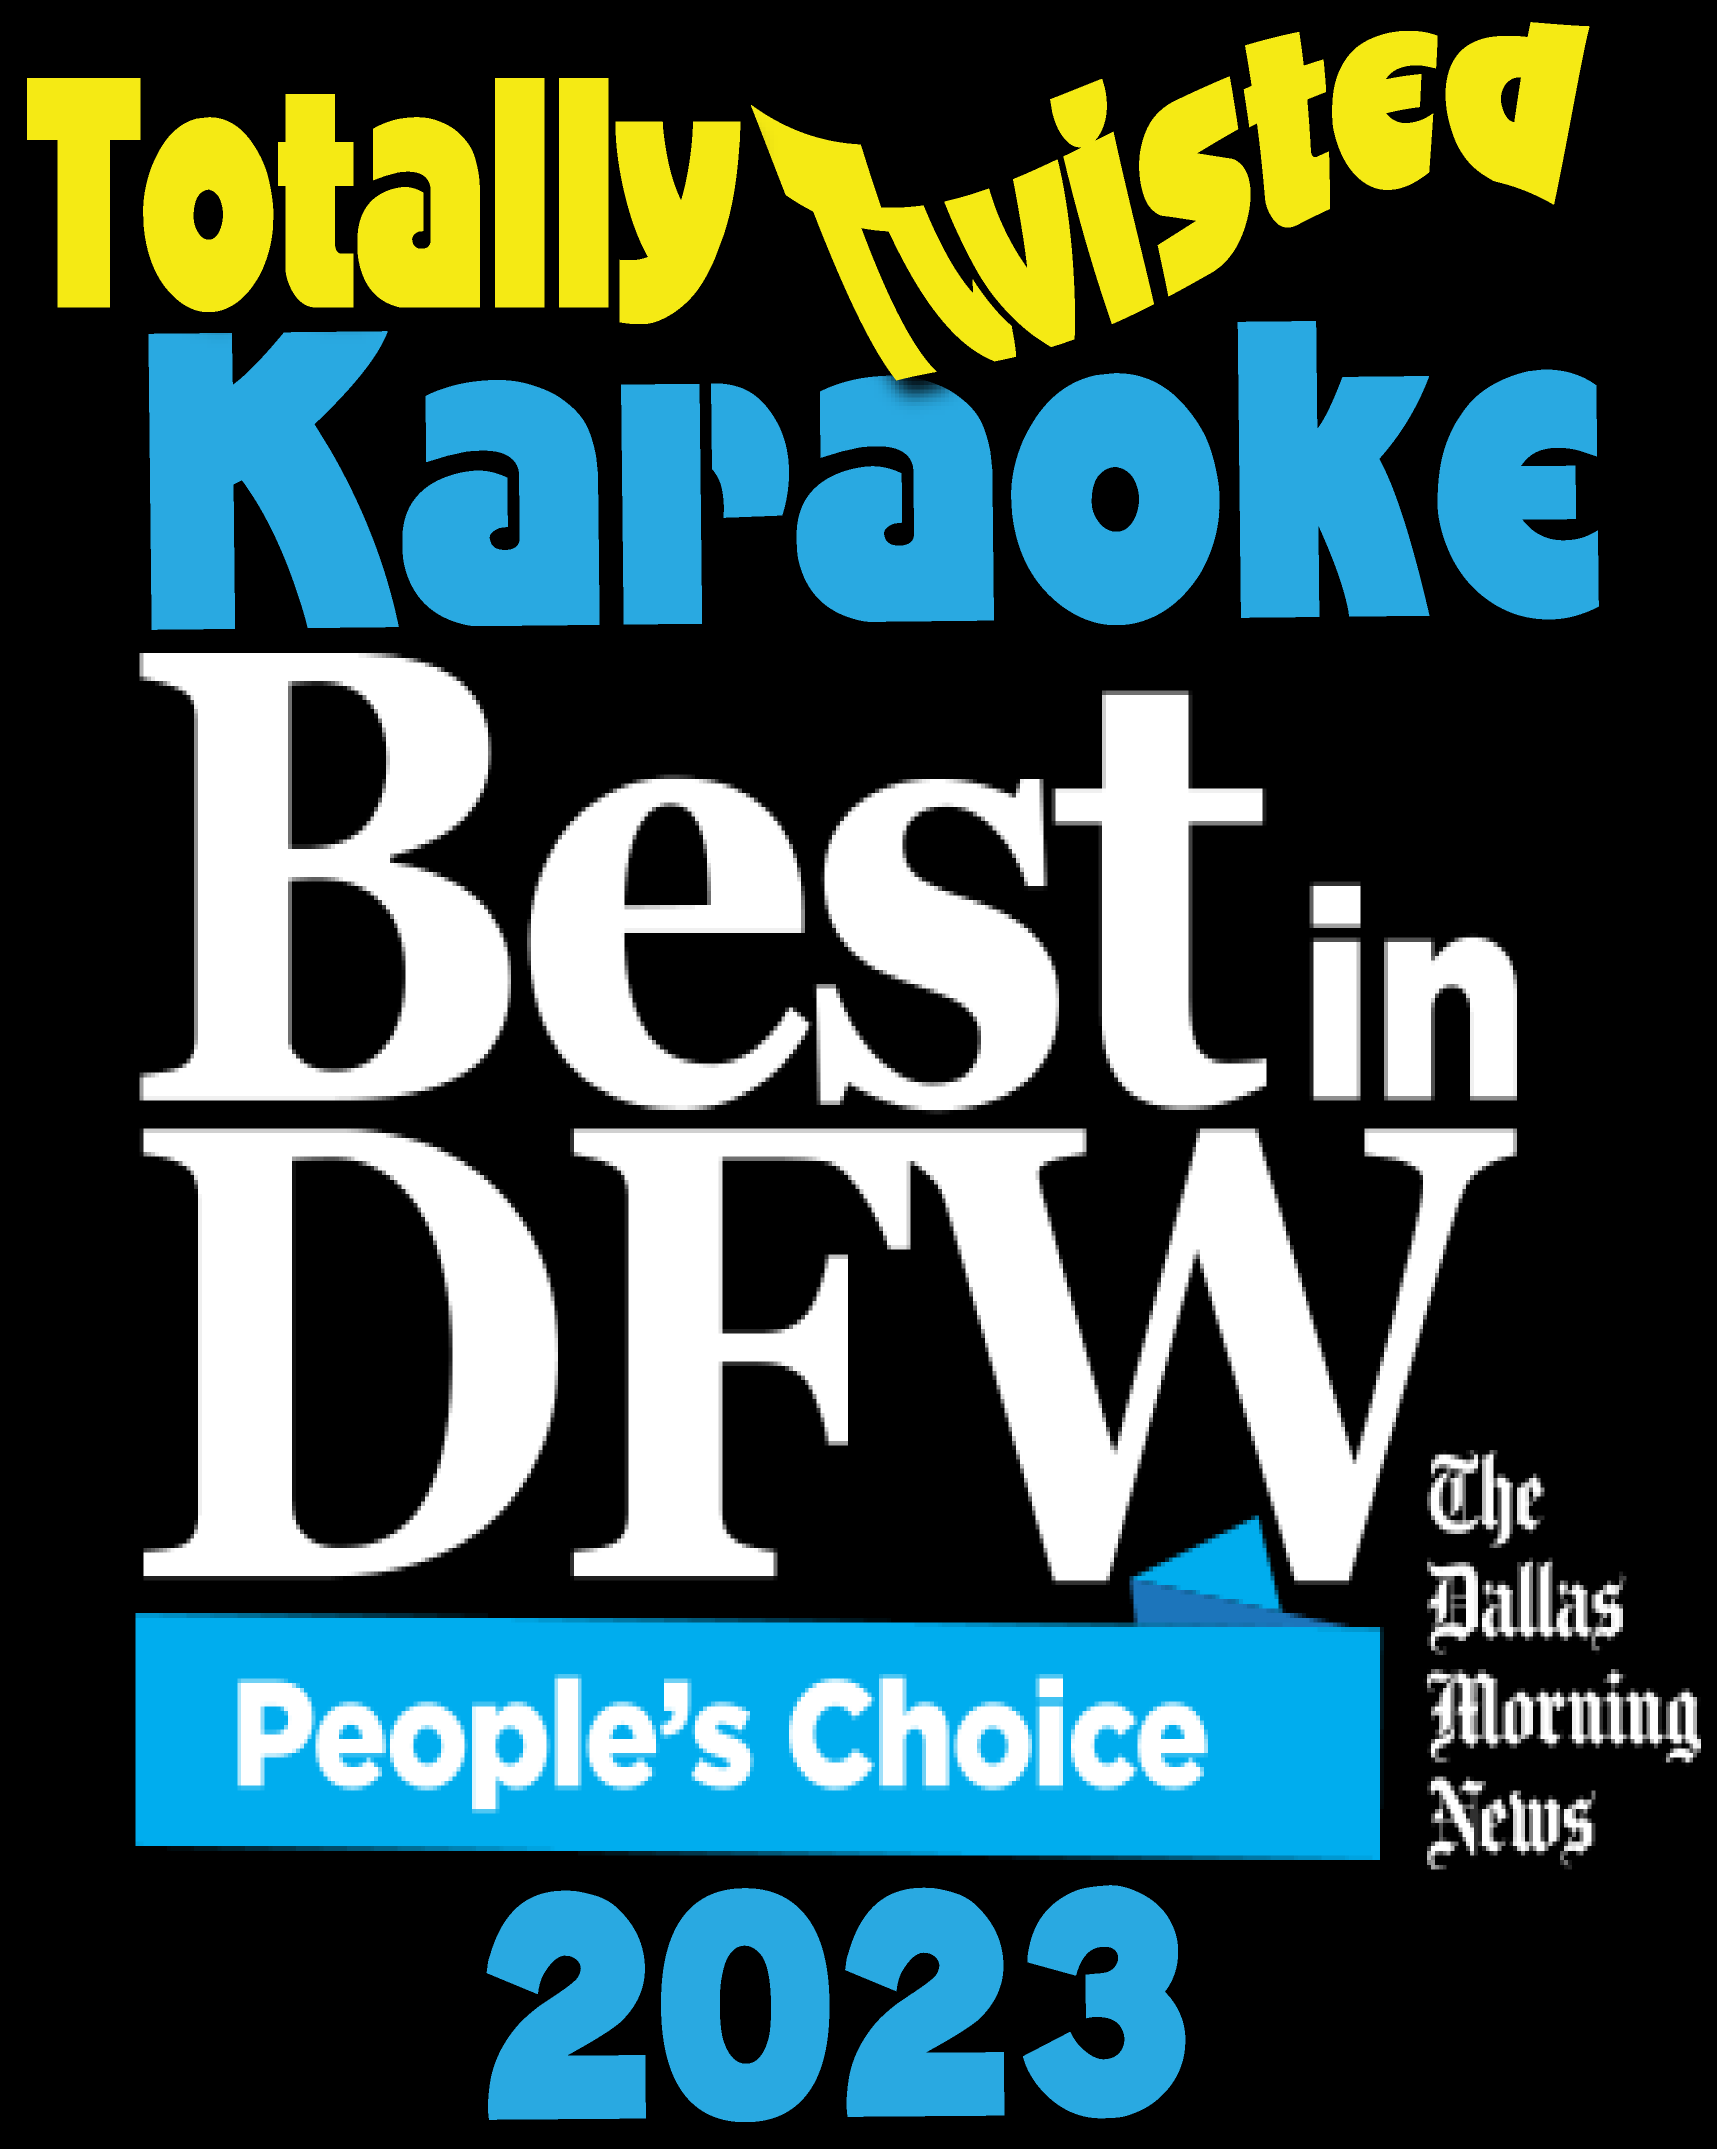 Makeup / Breakup Karaoke Contest in Dallas at Dave & Buster's